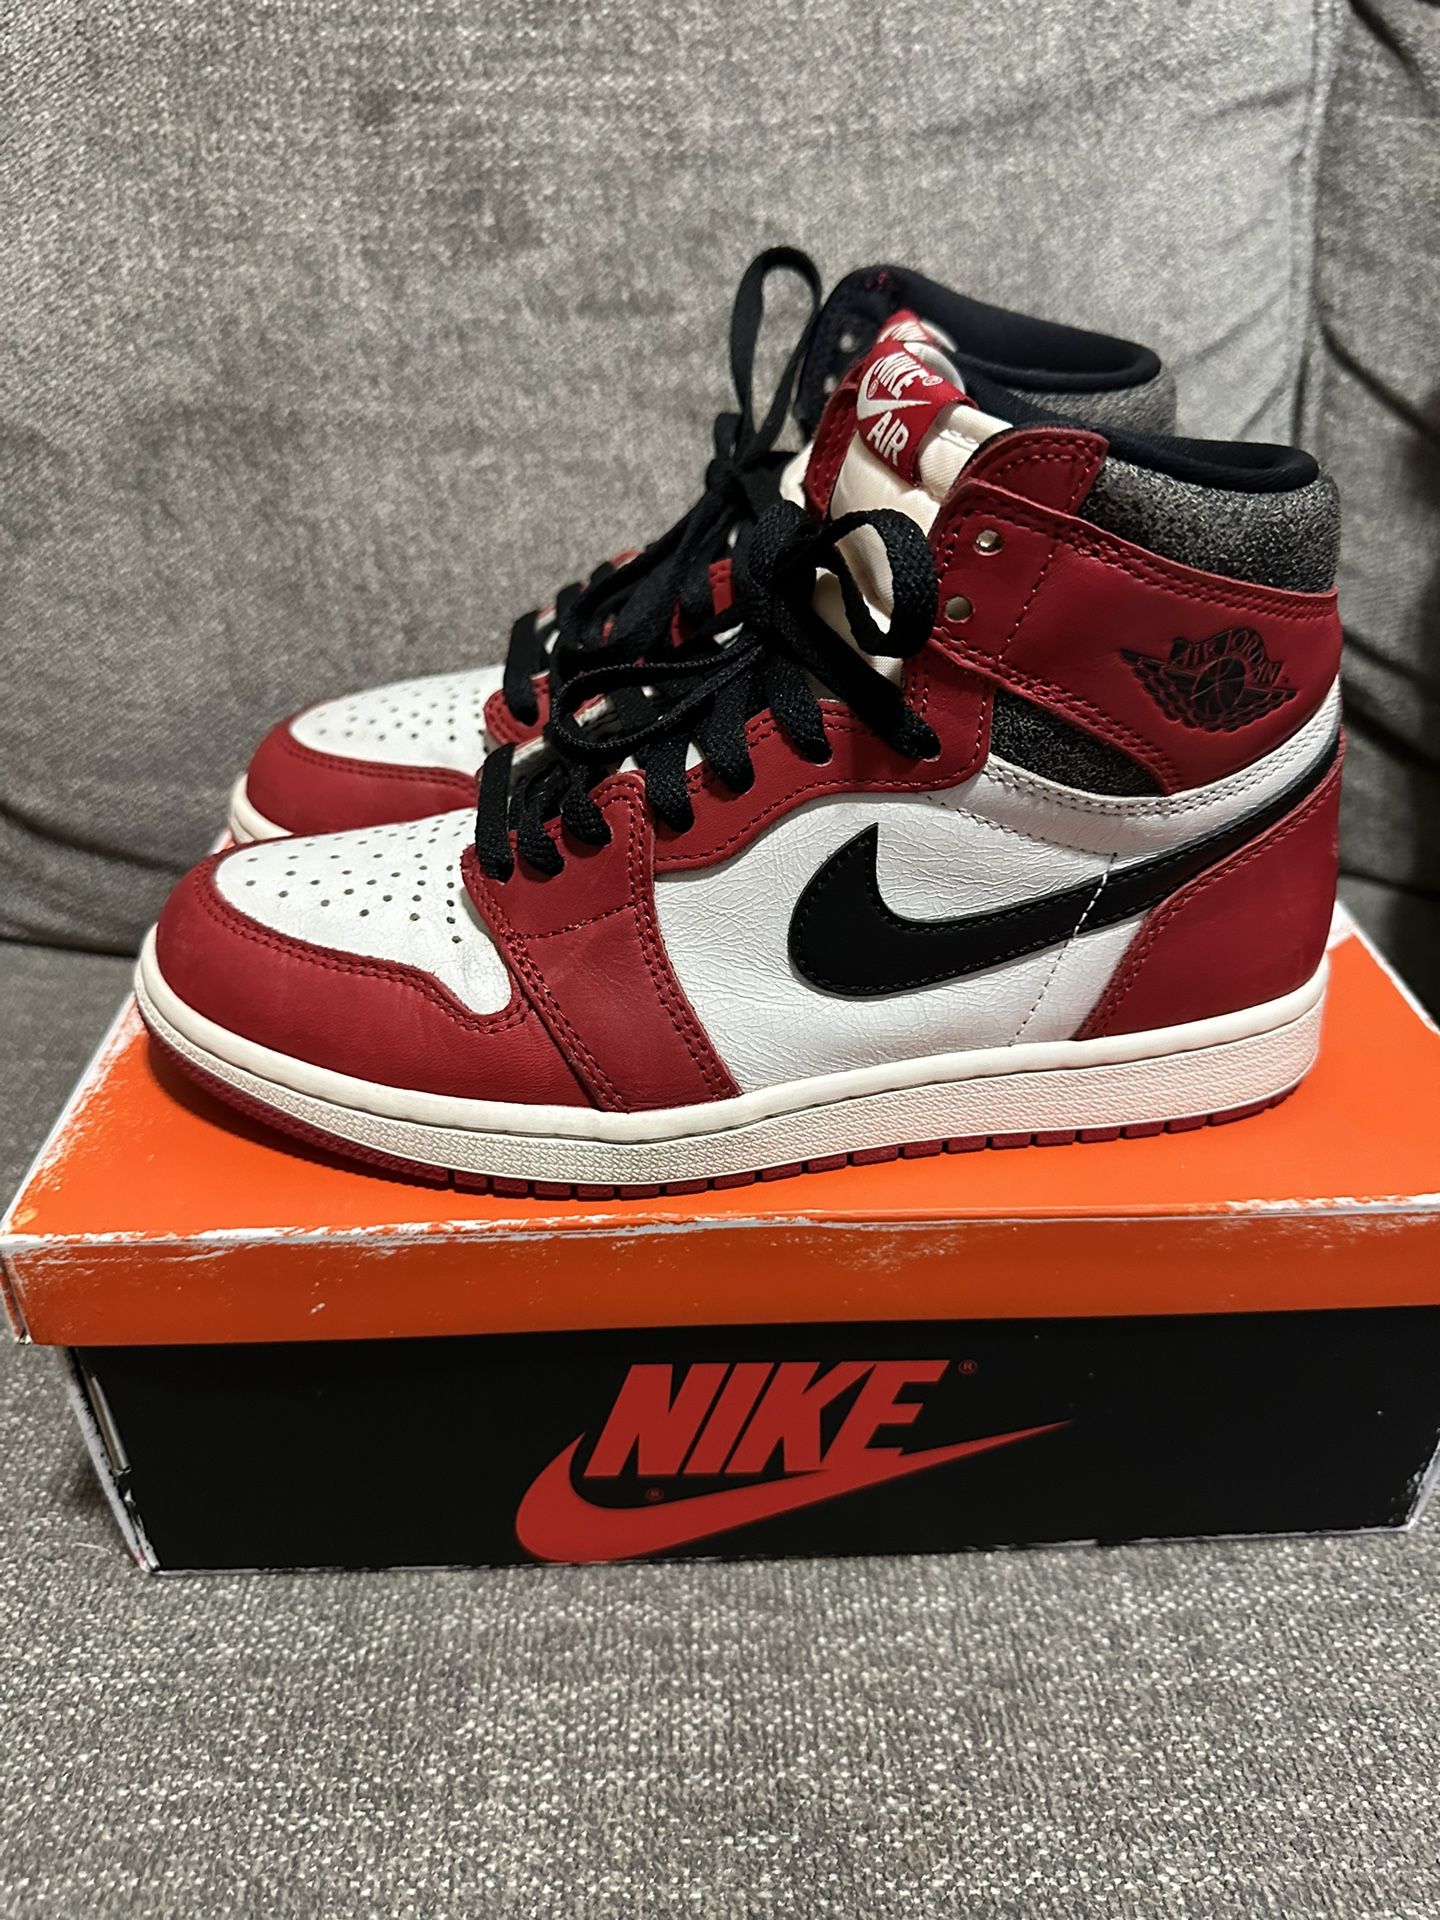 Jordan 1 Chicago Lost And Found  Size 7.5  Men